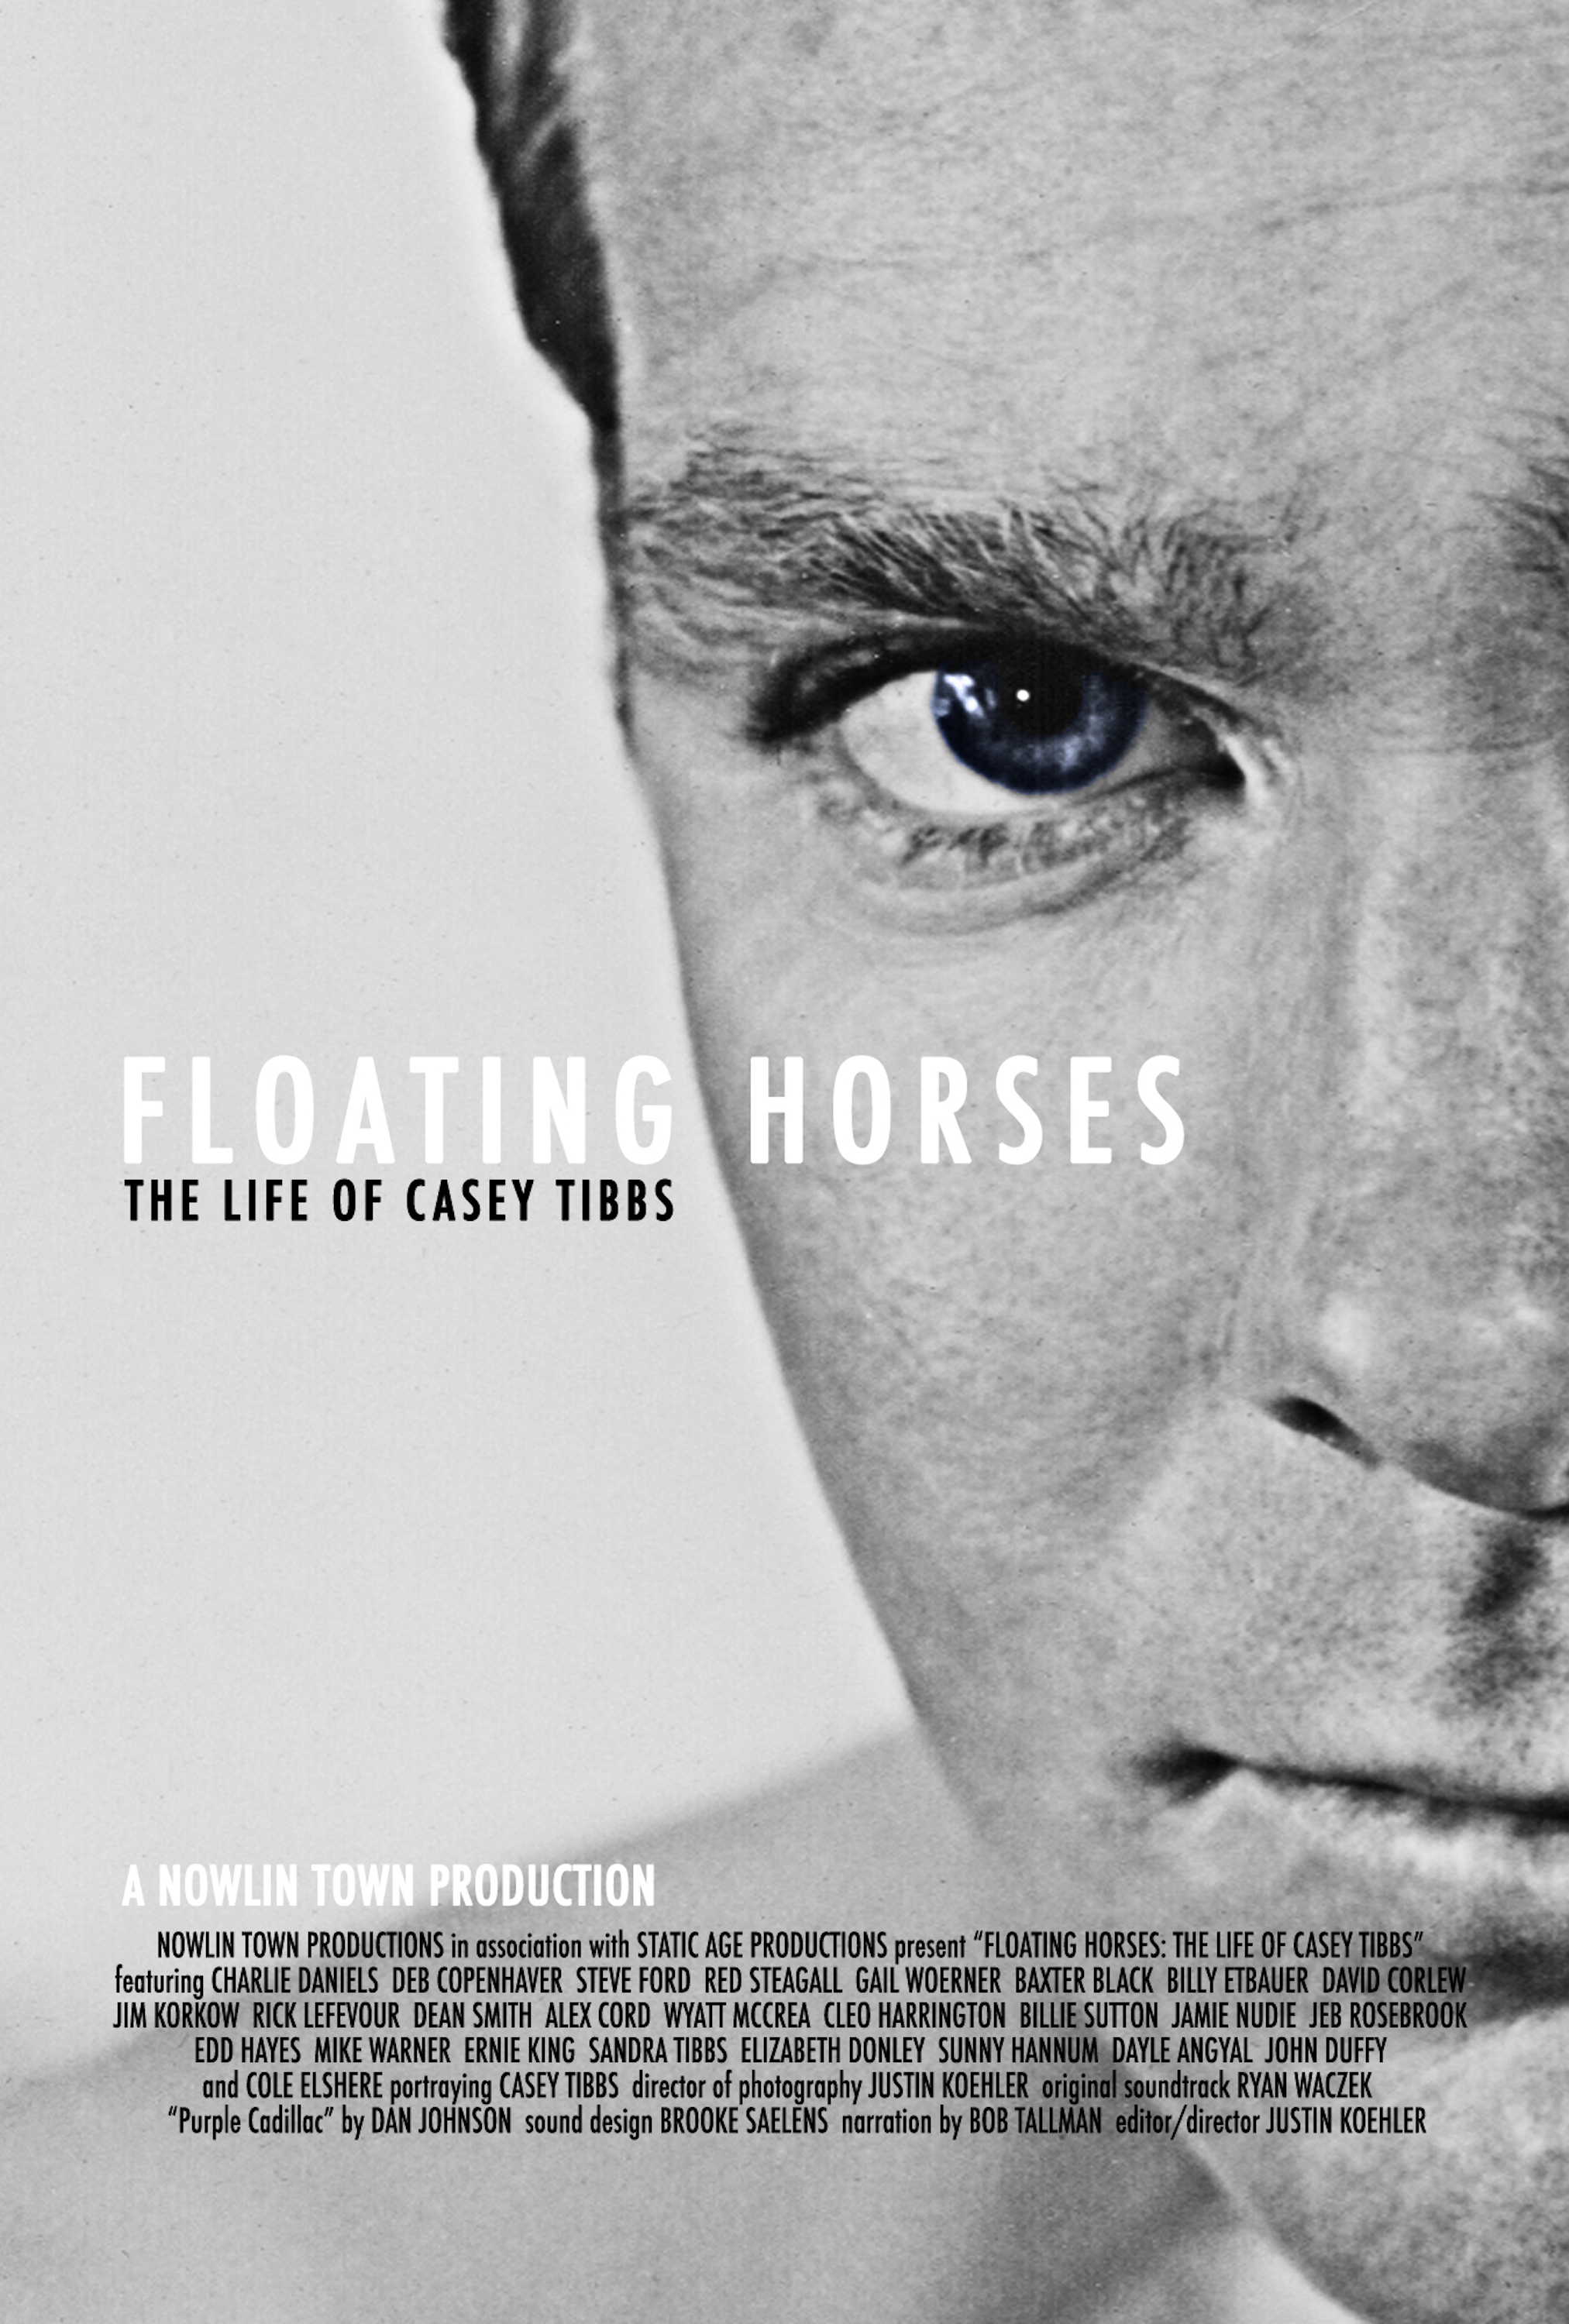 Floating Horses: The Life of Casey Tibbs